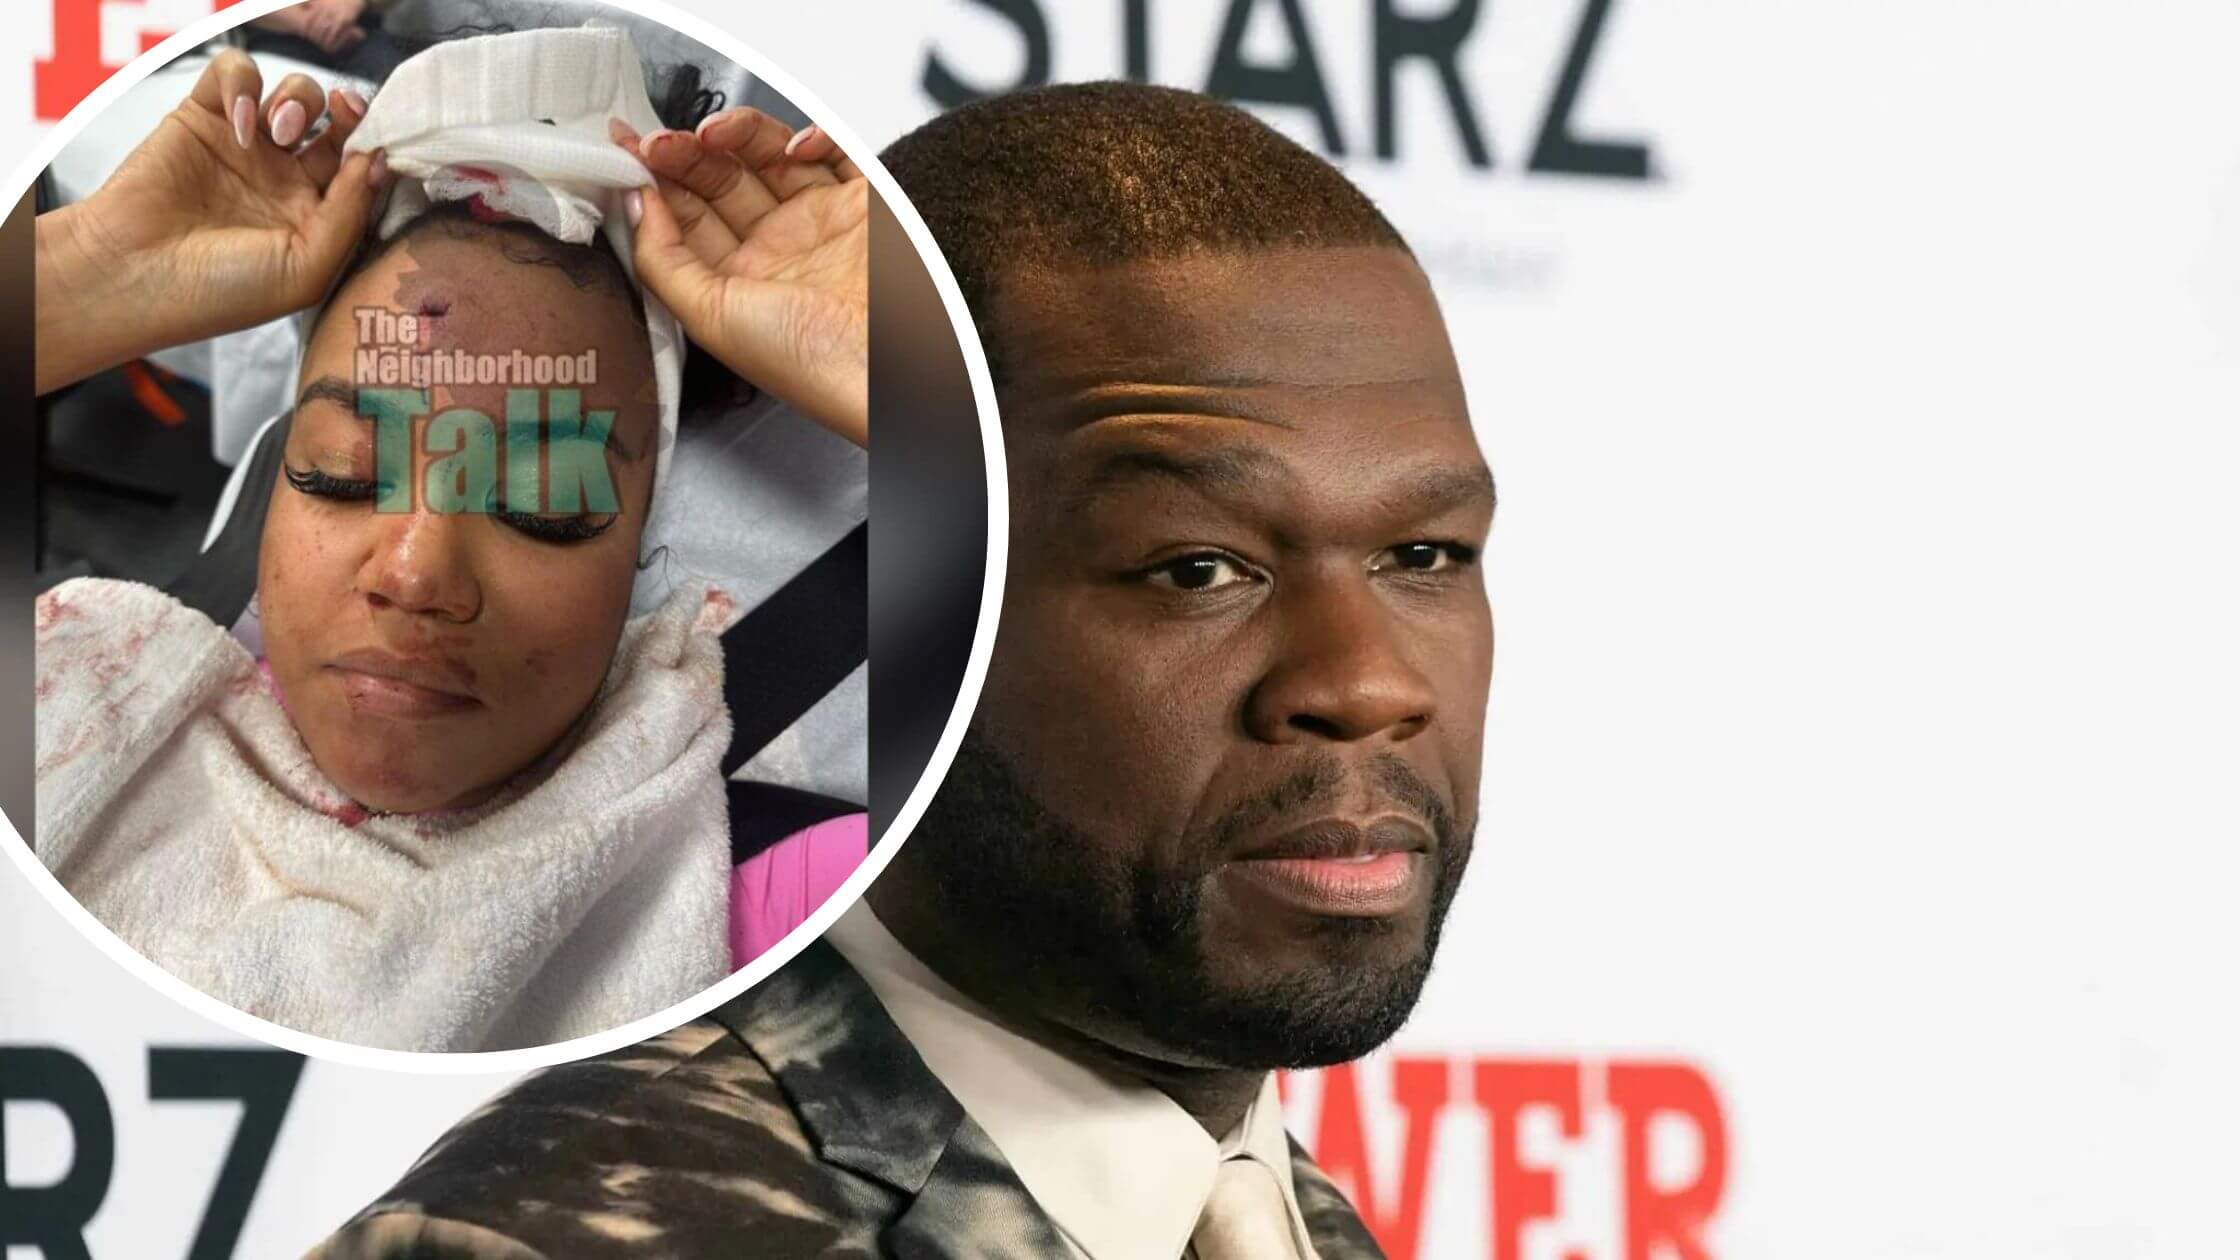 Microphone Mishap: 50 Cent Faces Battery Report After Concert Incident